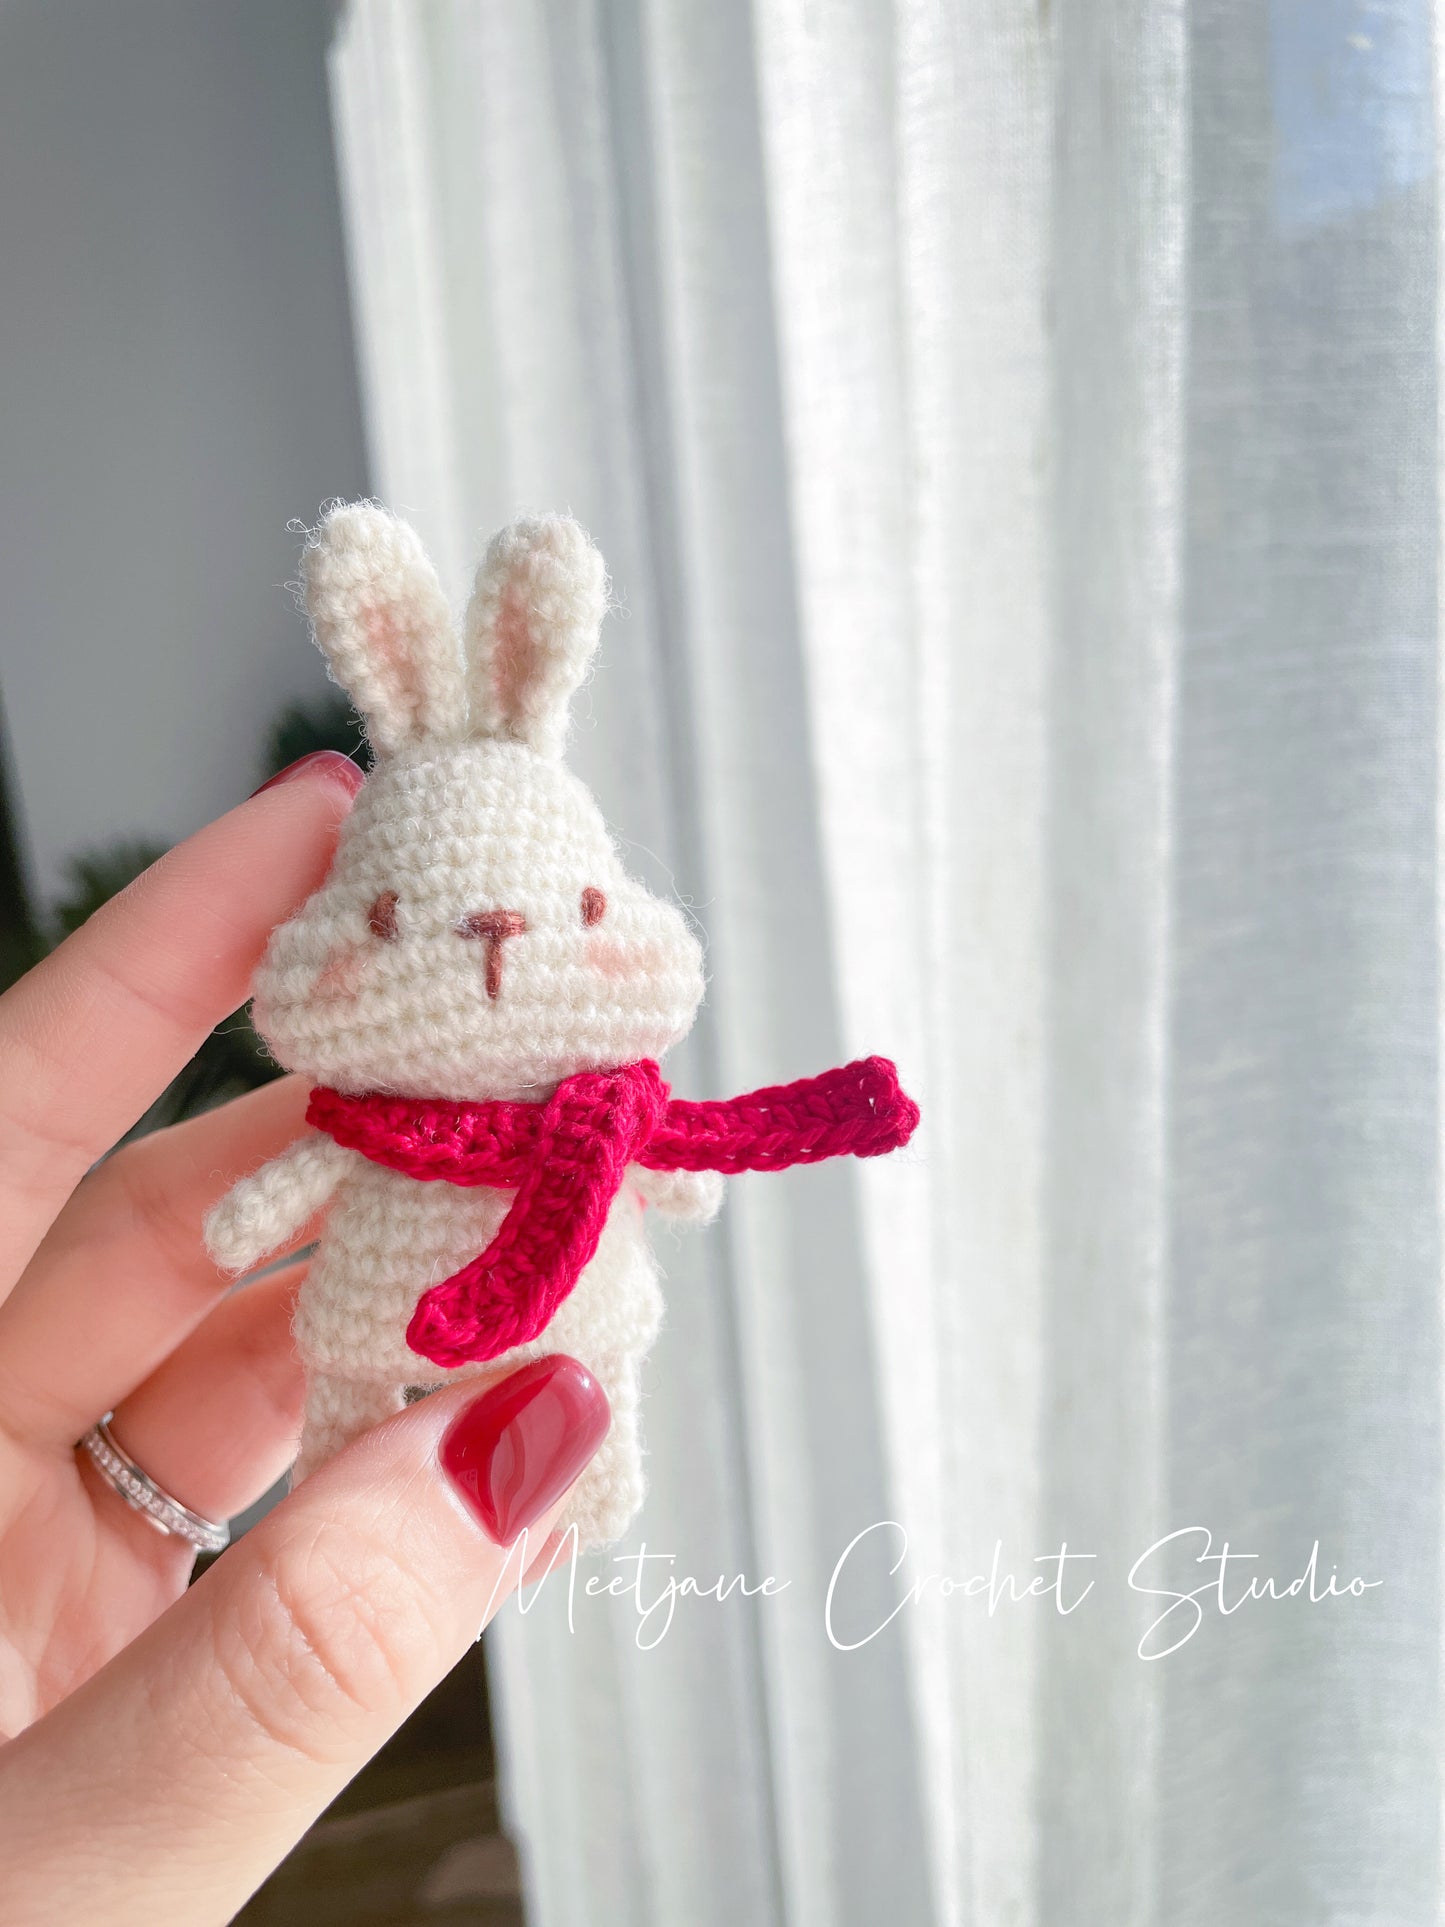 Crochet accessories| Melbourne |Rabbit brooches|NEW YEAR EDITION